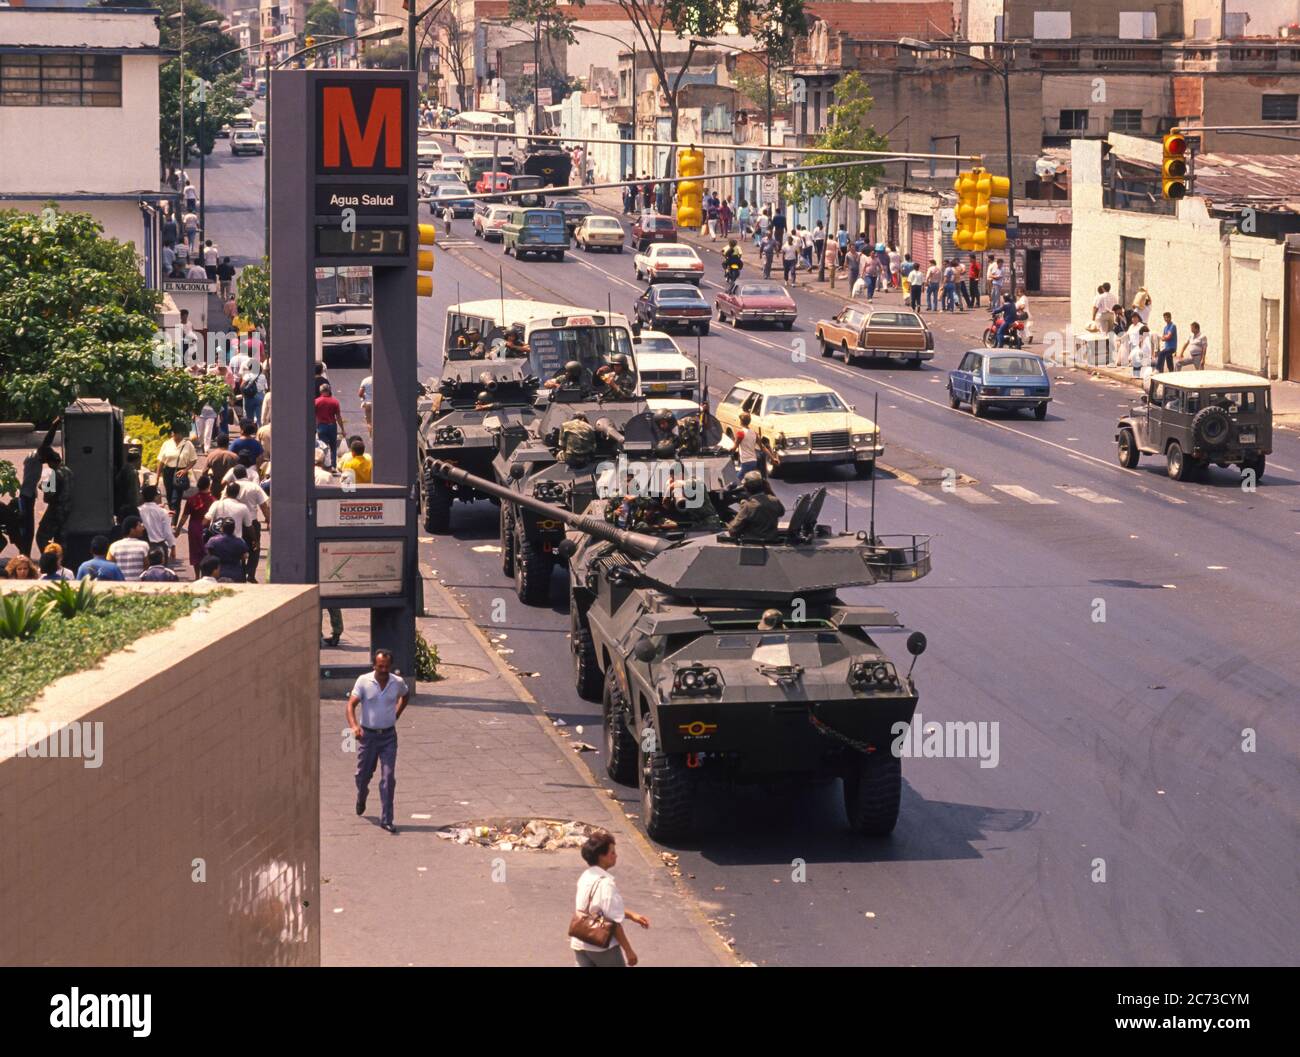 CARACAS, VENEZUELA, MARCH1989 - Soldiers in armored vehicles on street during state of emergency after protests, riots and looting in Caracas, know as the Caracazo. Stock Photo